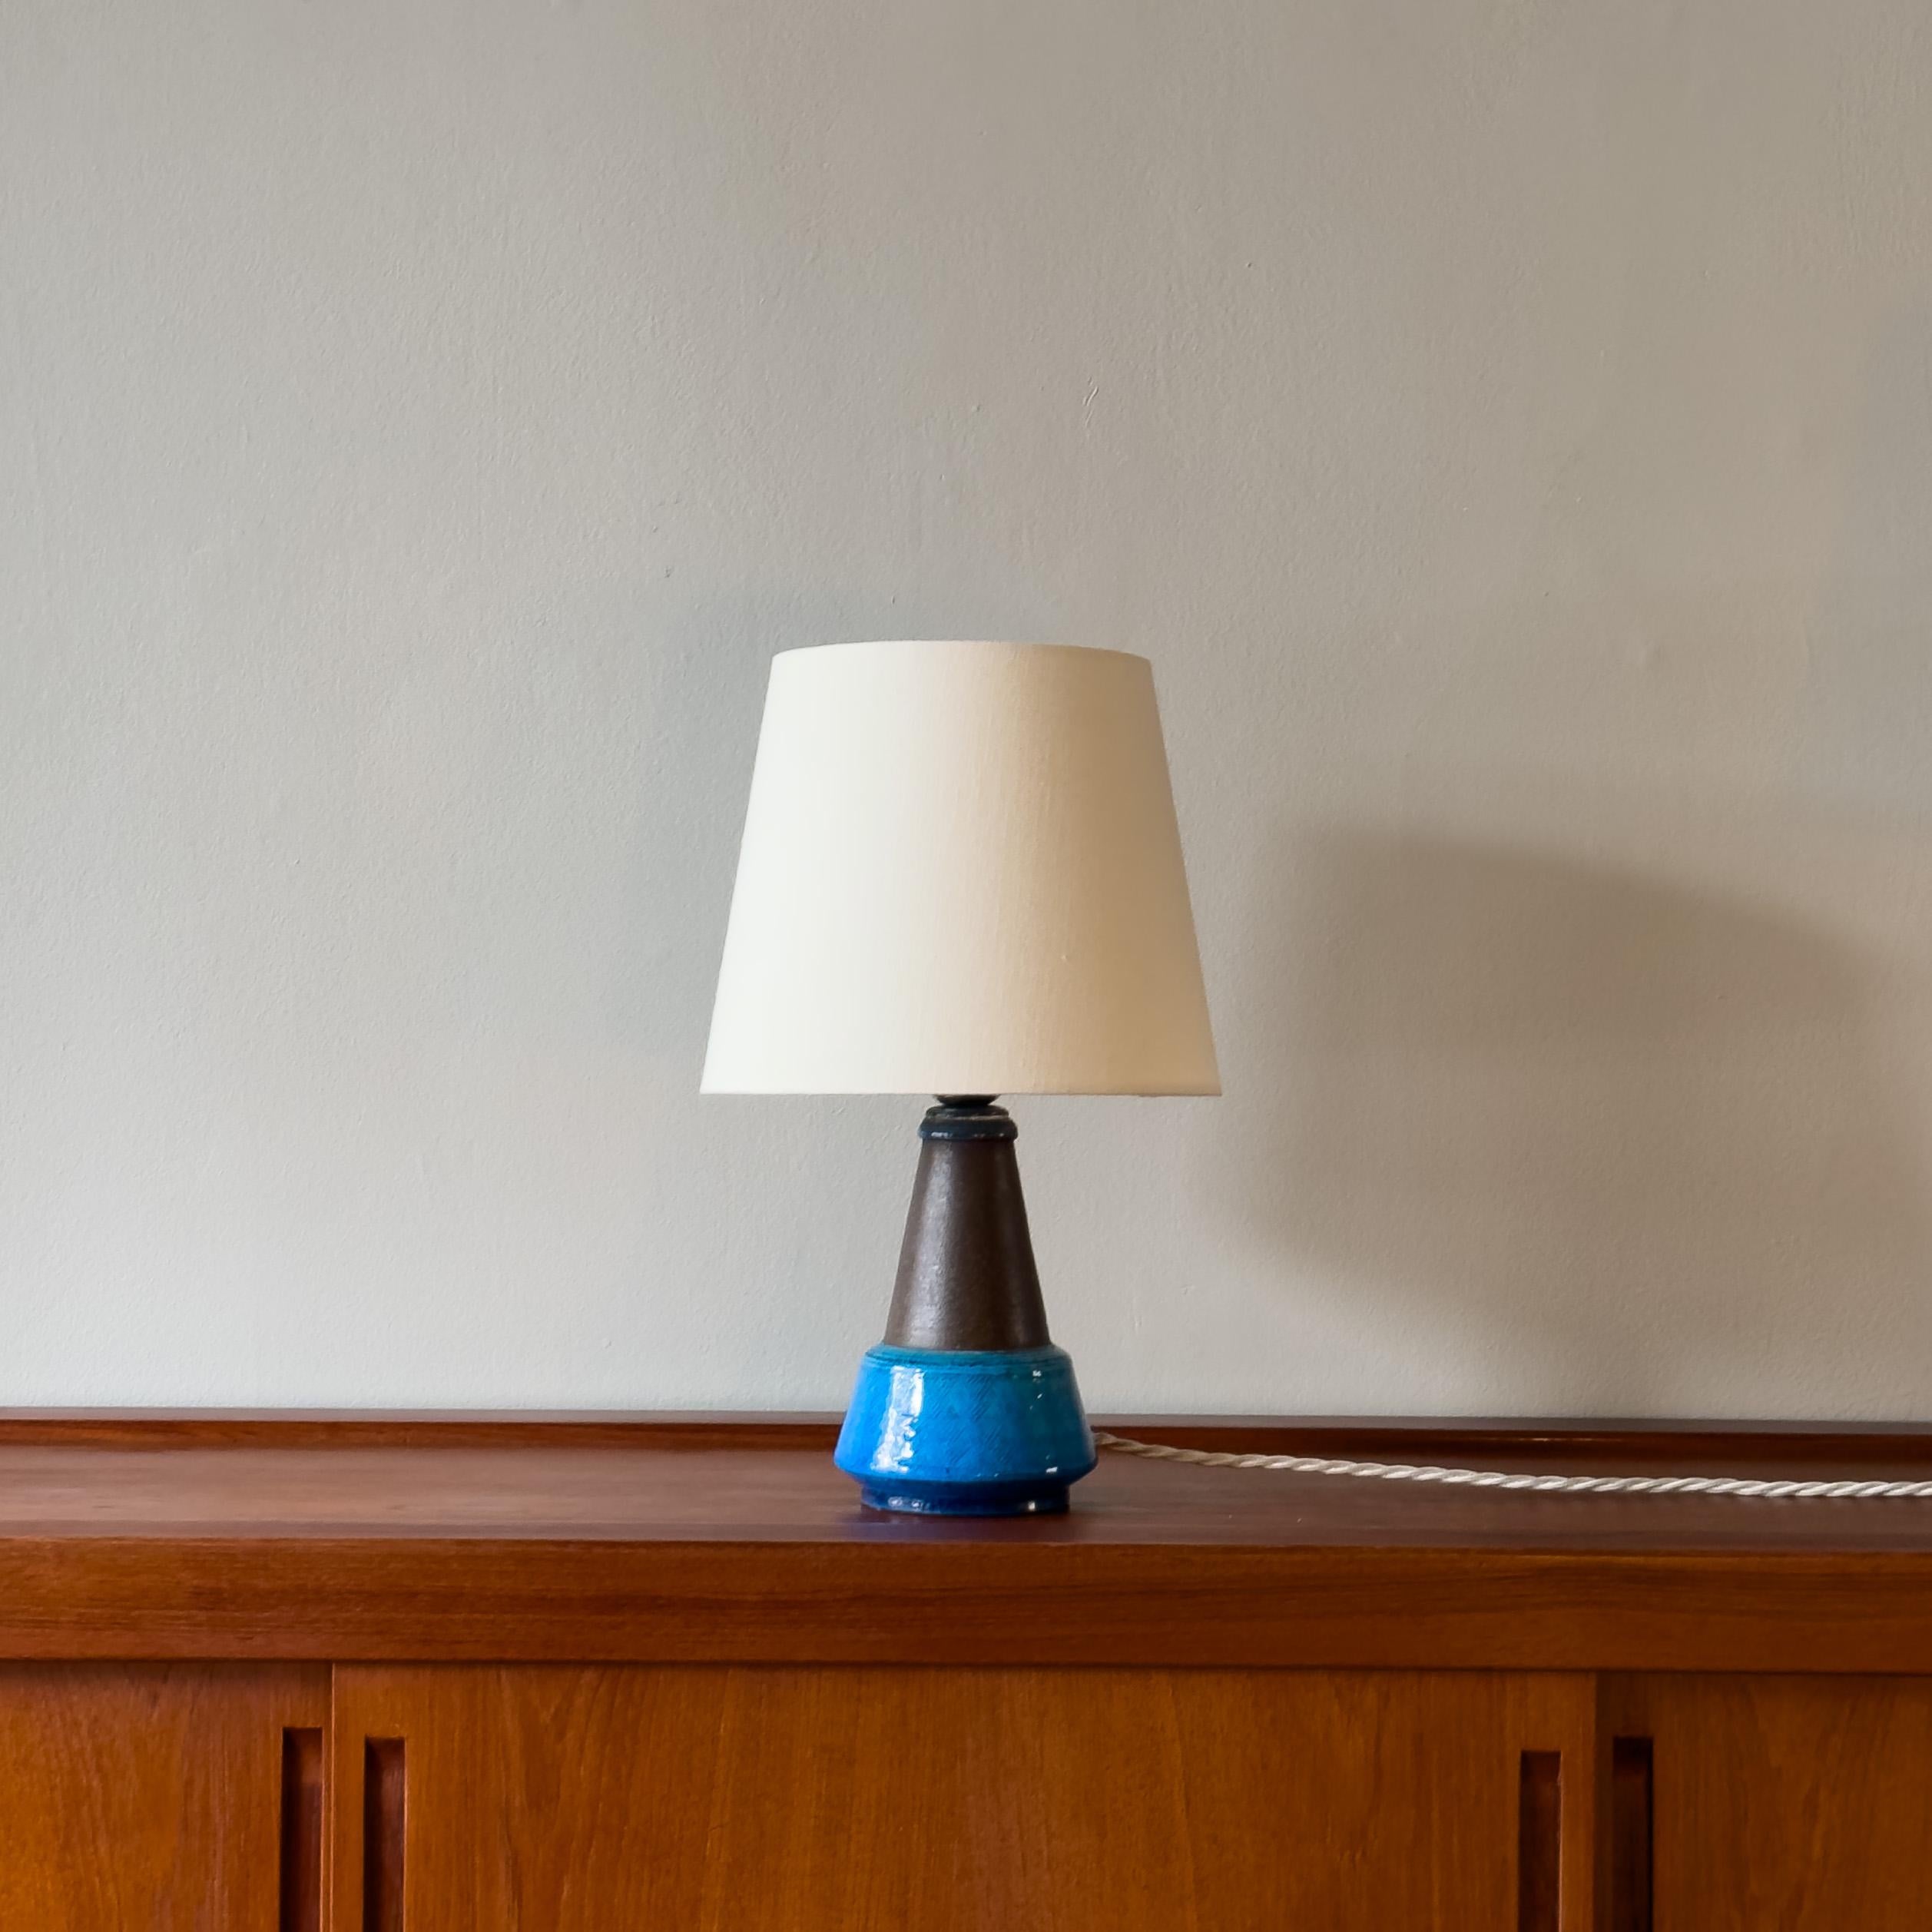 Stoneware Table Lamp #1 Nils Kähler In Fair Condition For Sale In London, GB